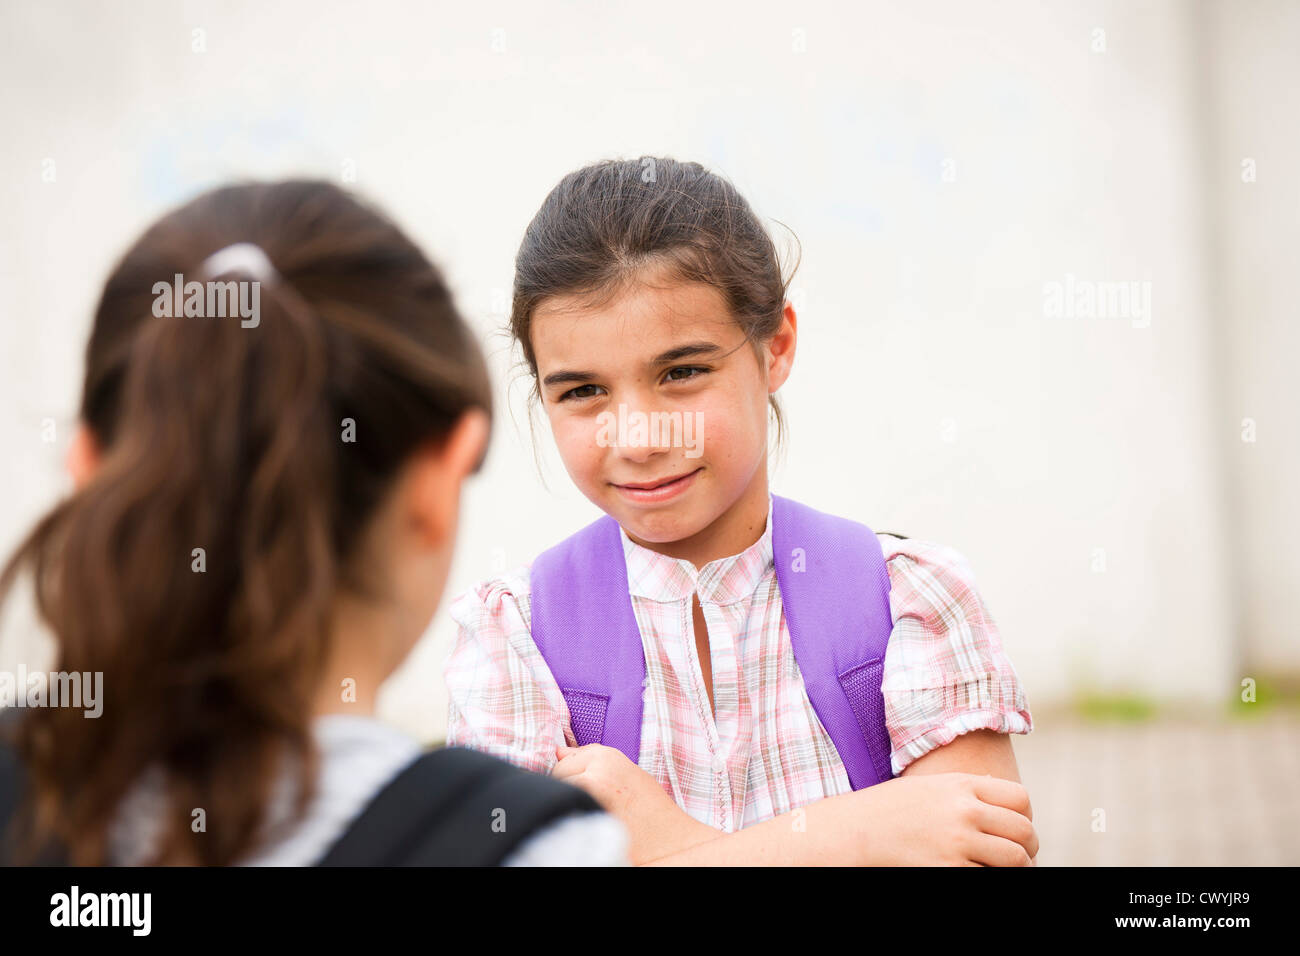 Two girls looking at each other Stock Photo